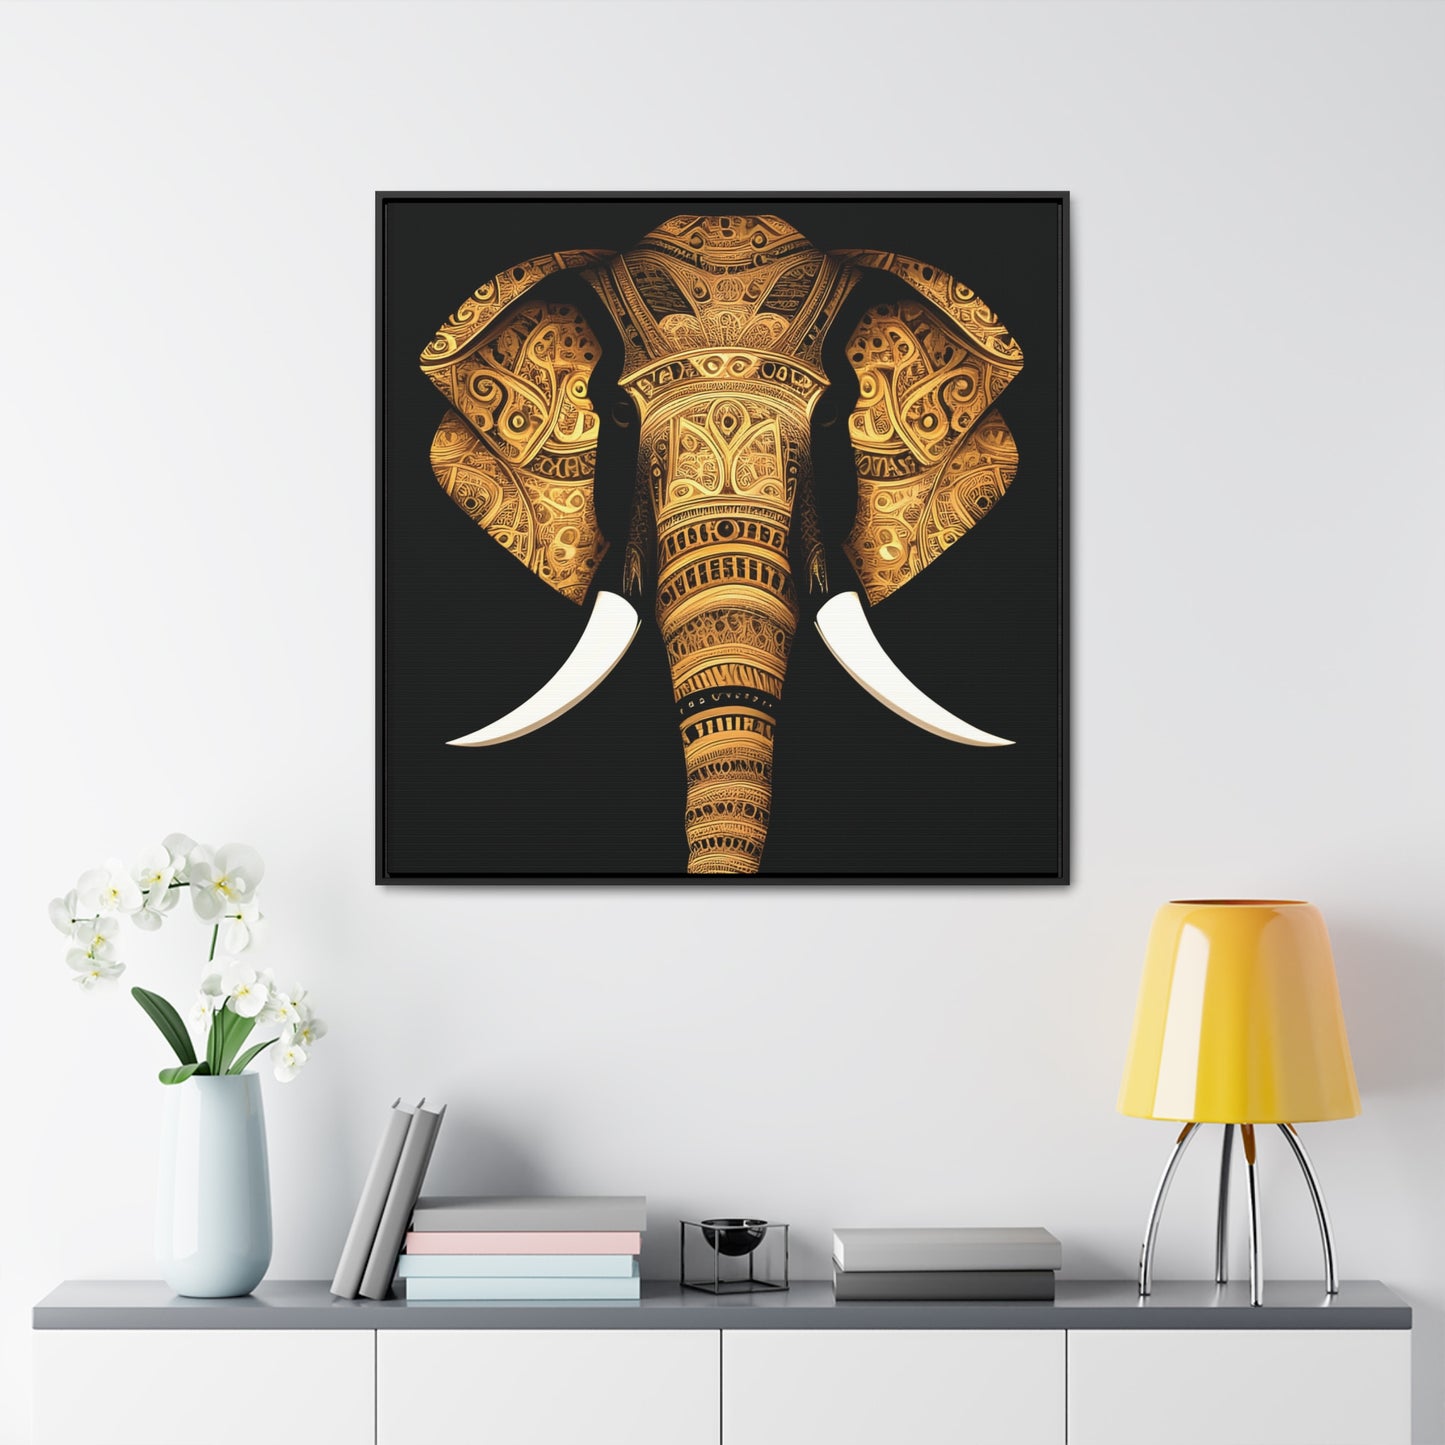 Gold Tribal Elephant Head on Black Background Print on Canvas in a Floating Frame 16x16